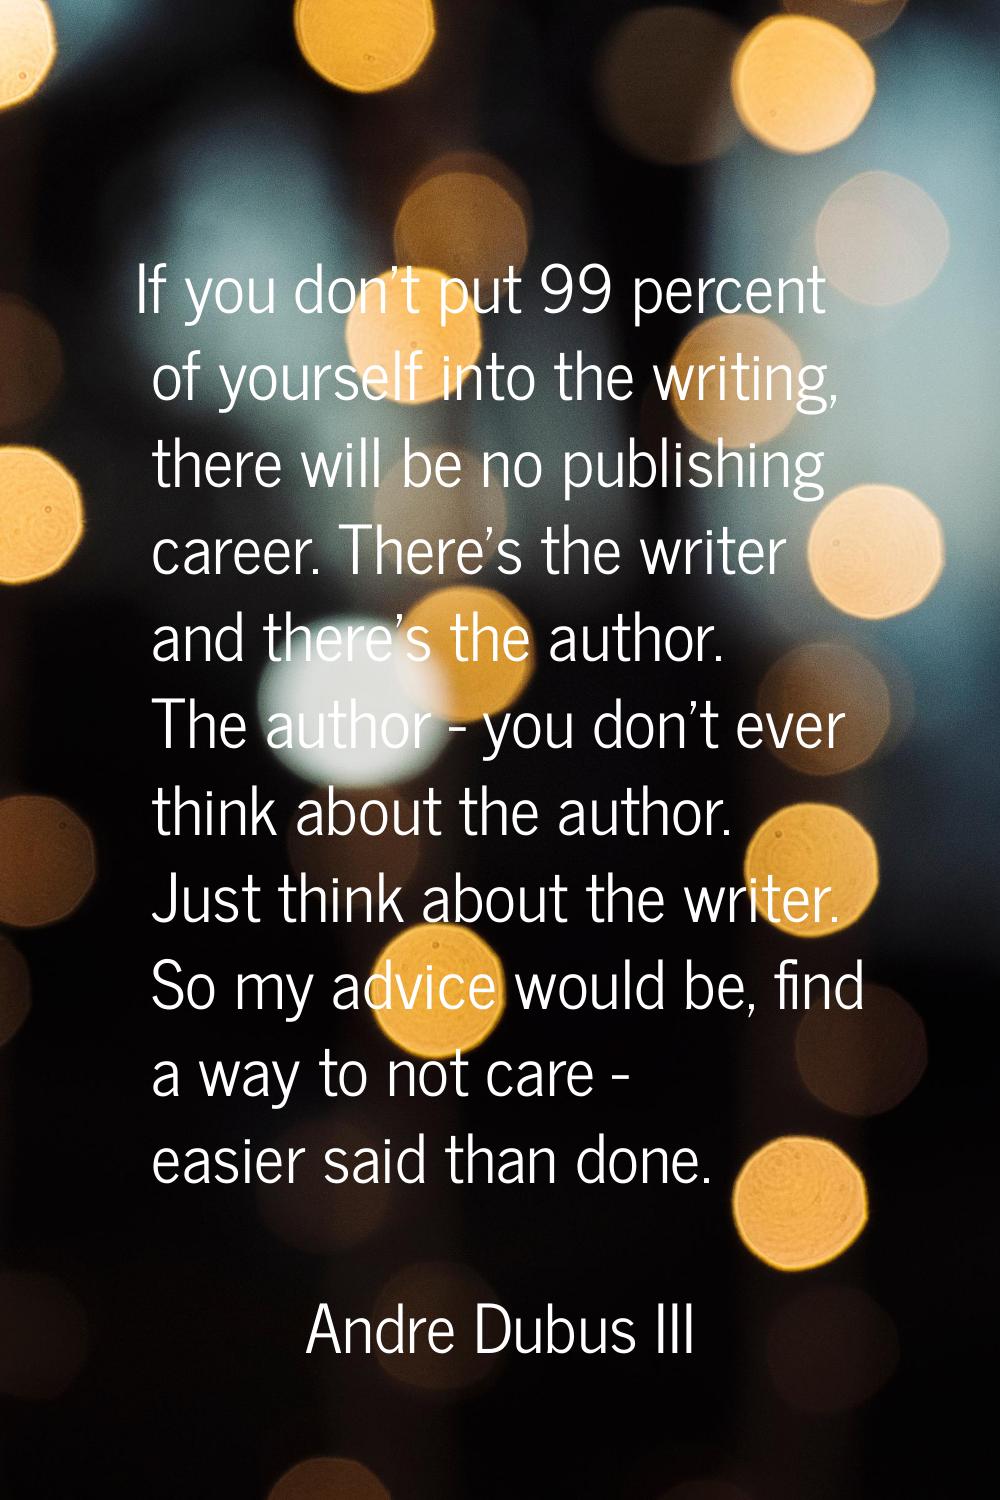 If you don't put 99 percent of yourself into the writing, there will be no publishing career. There